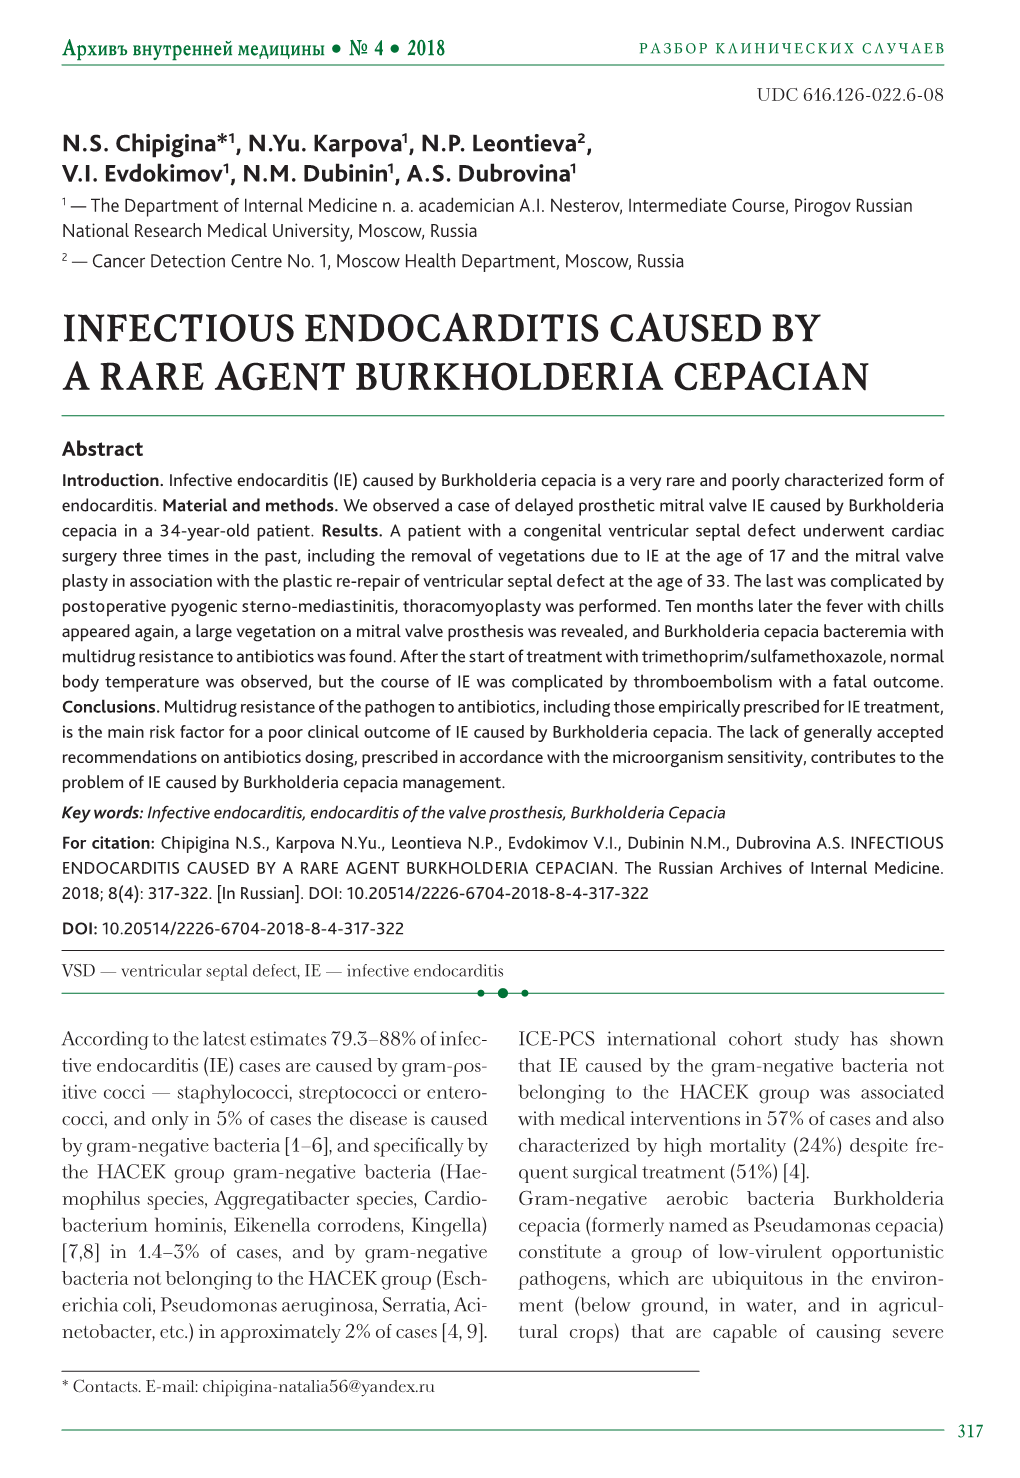 Infectious Endocarditis Caused by a Rare Agent Burkholderia Cepacian